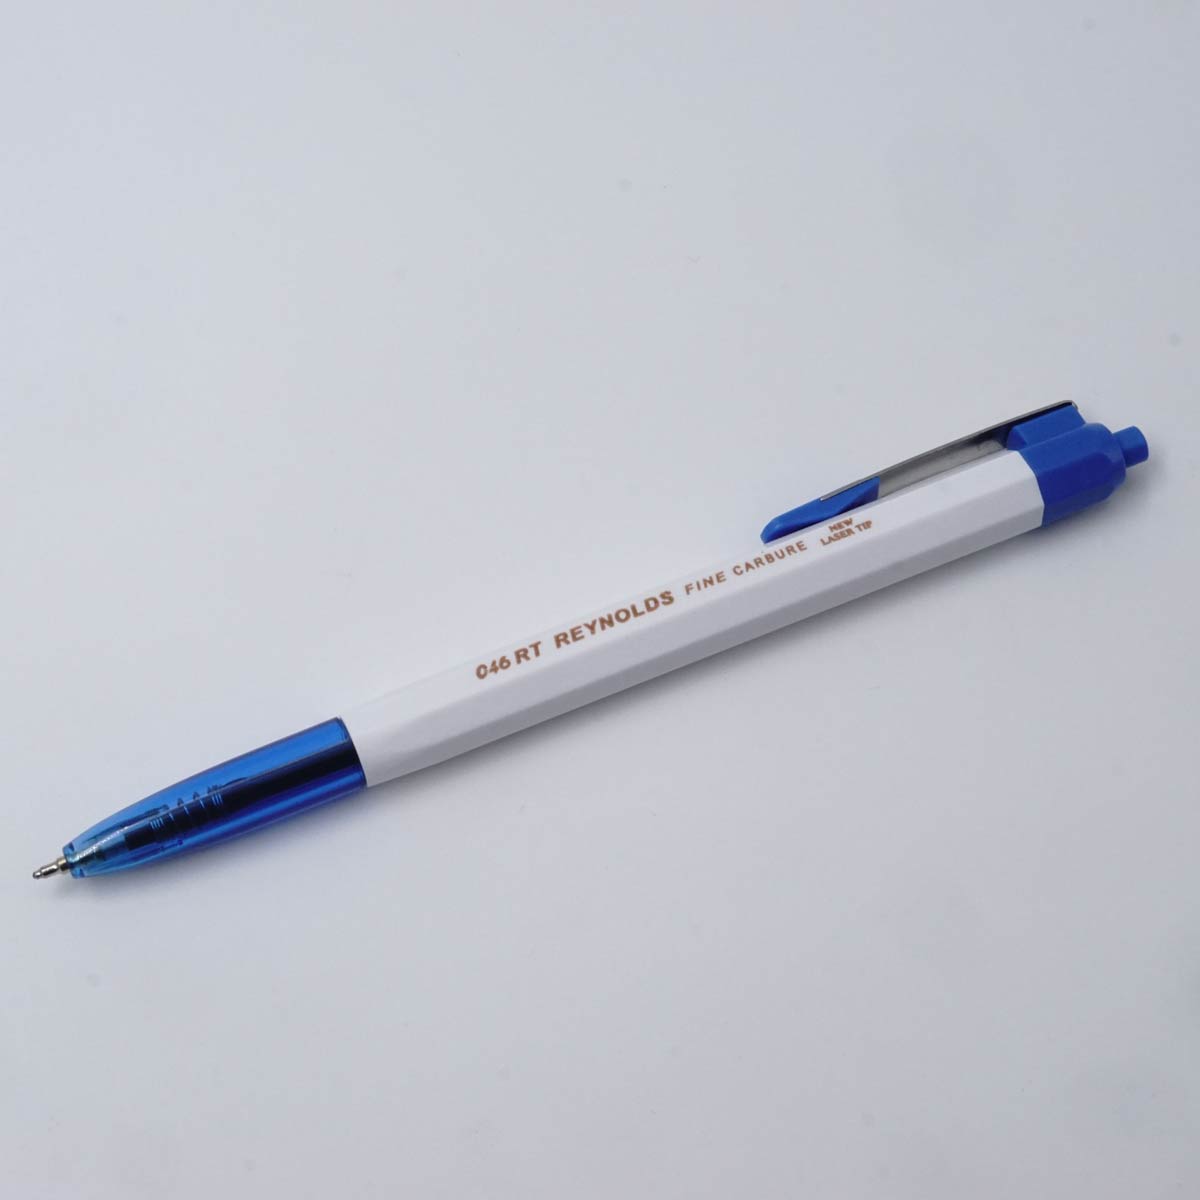 Reynolds 0.46 RT White Body With Blue Grip Retractable Ball pen SKU 50283